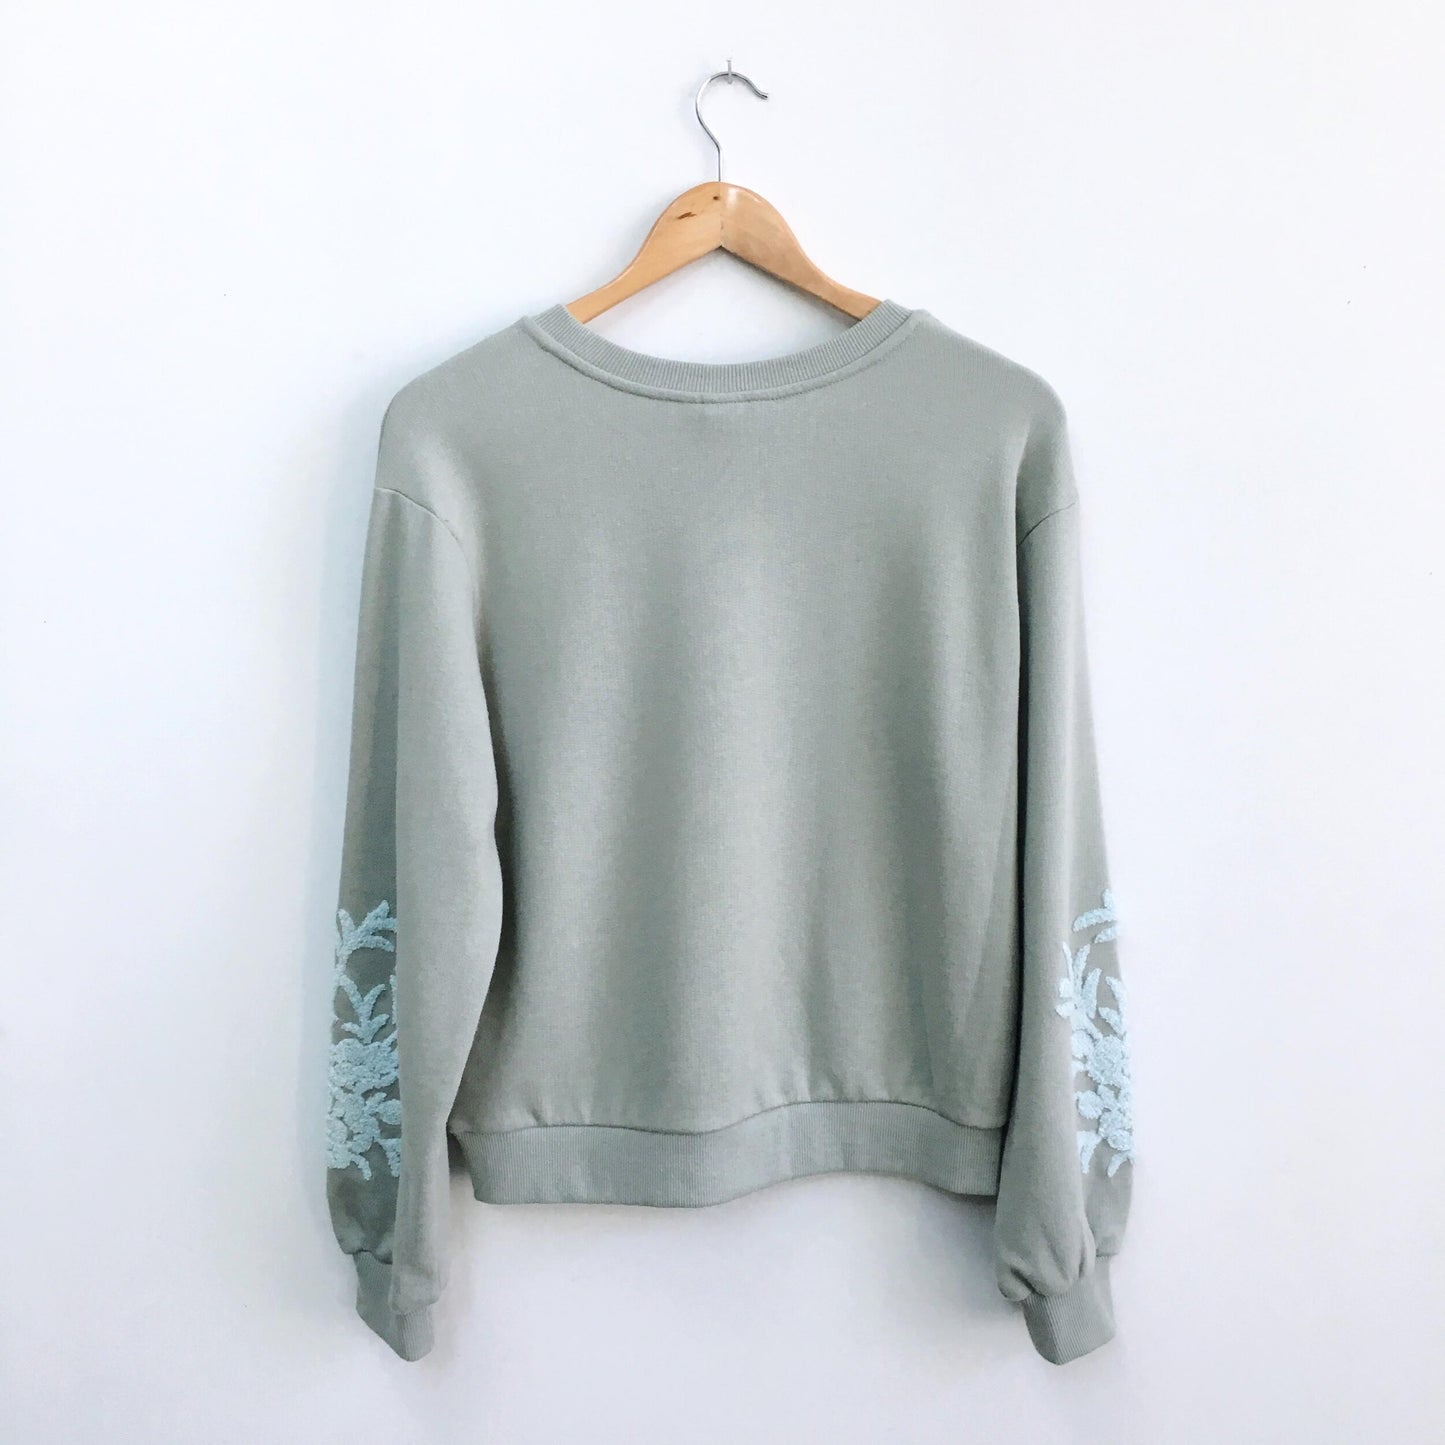 H&M Embroidered Sweatshirt - size xs - NWOT